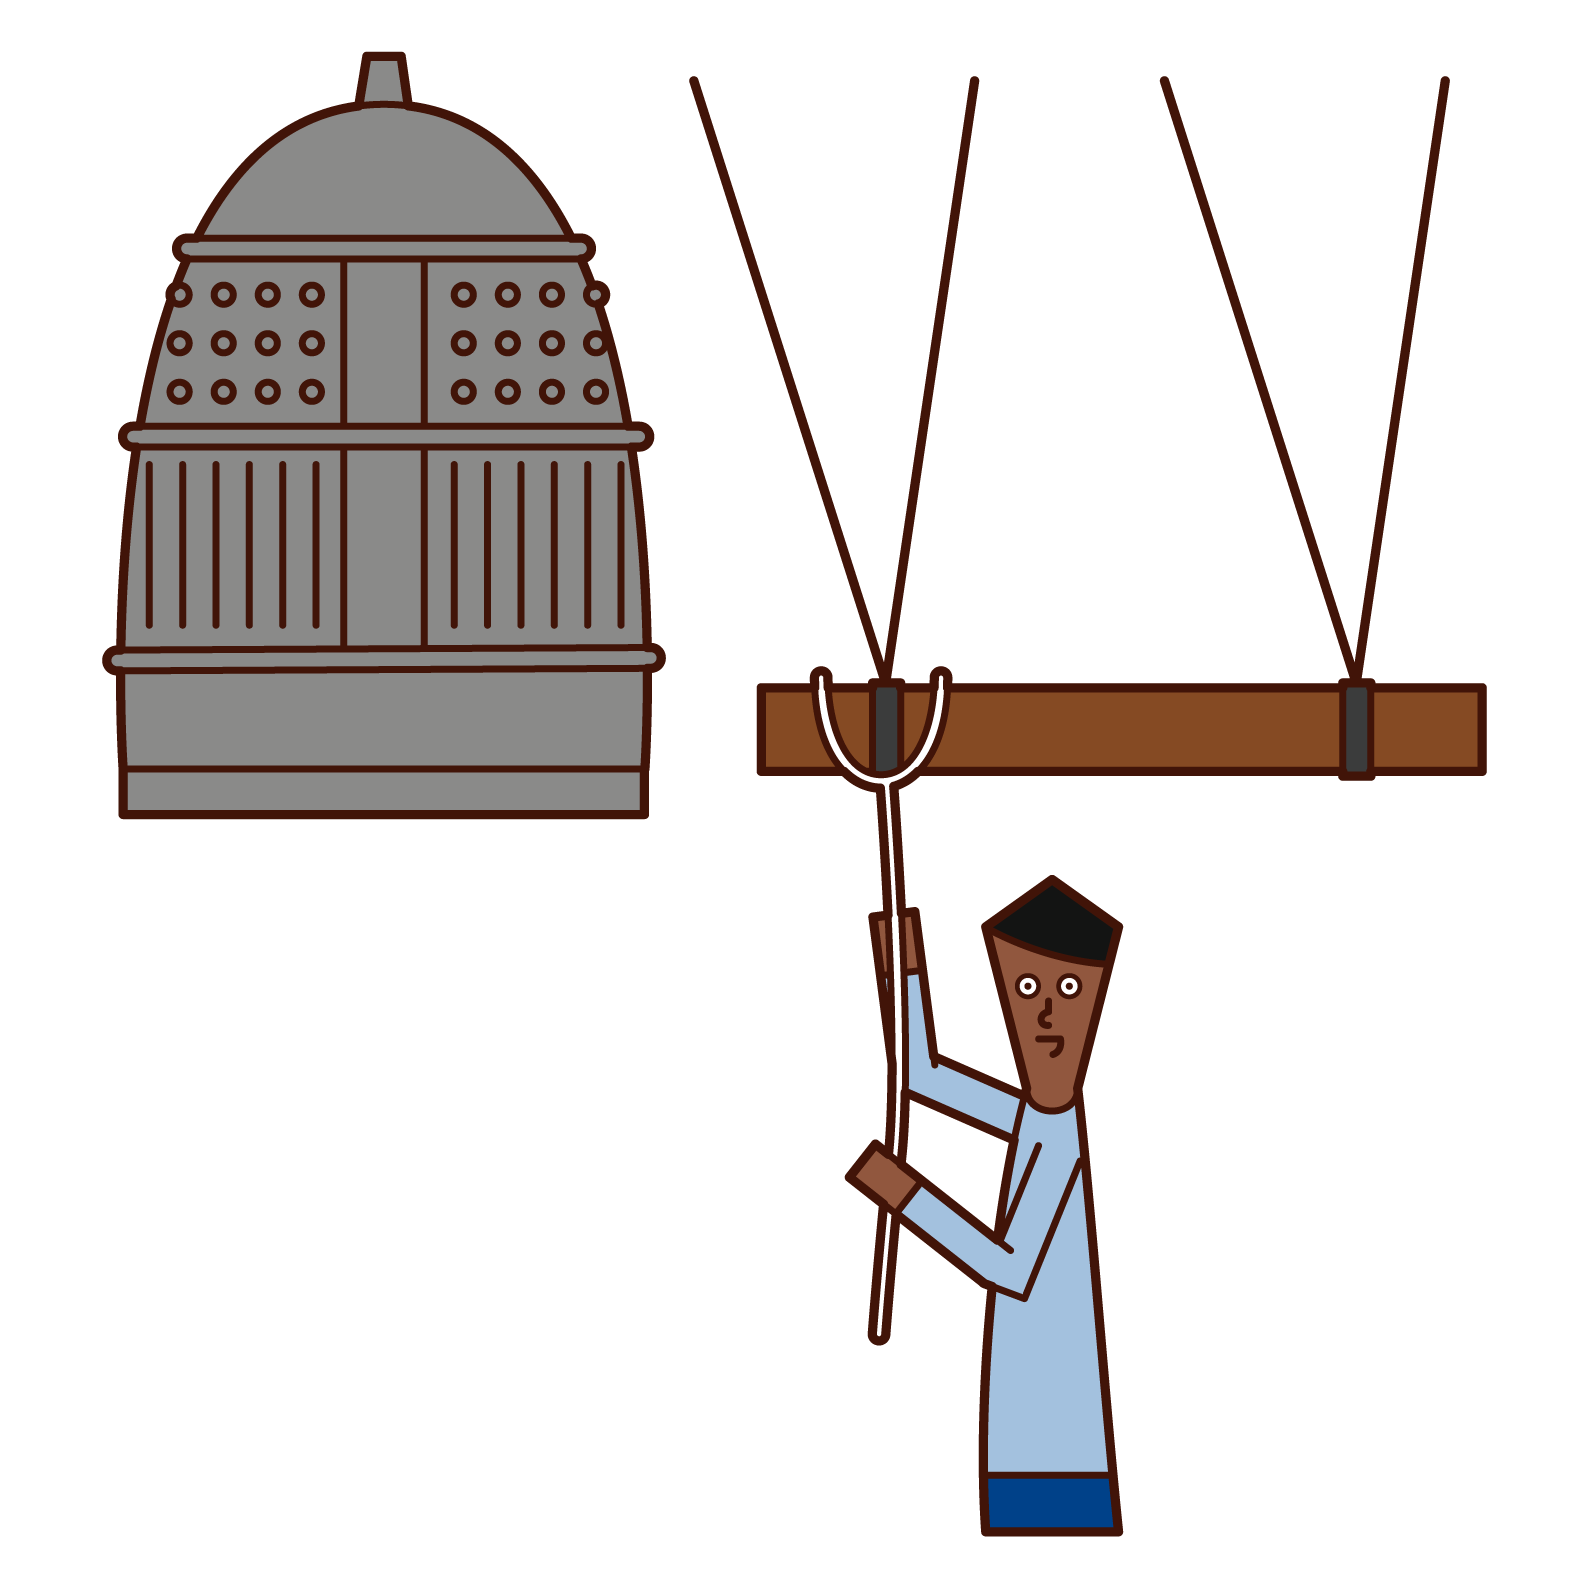 Illustration of a man ringing a temple bell